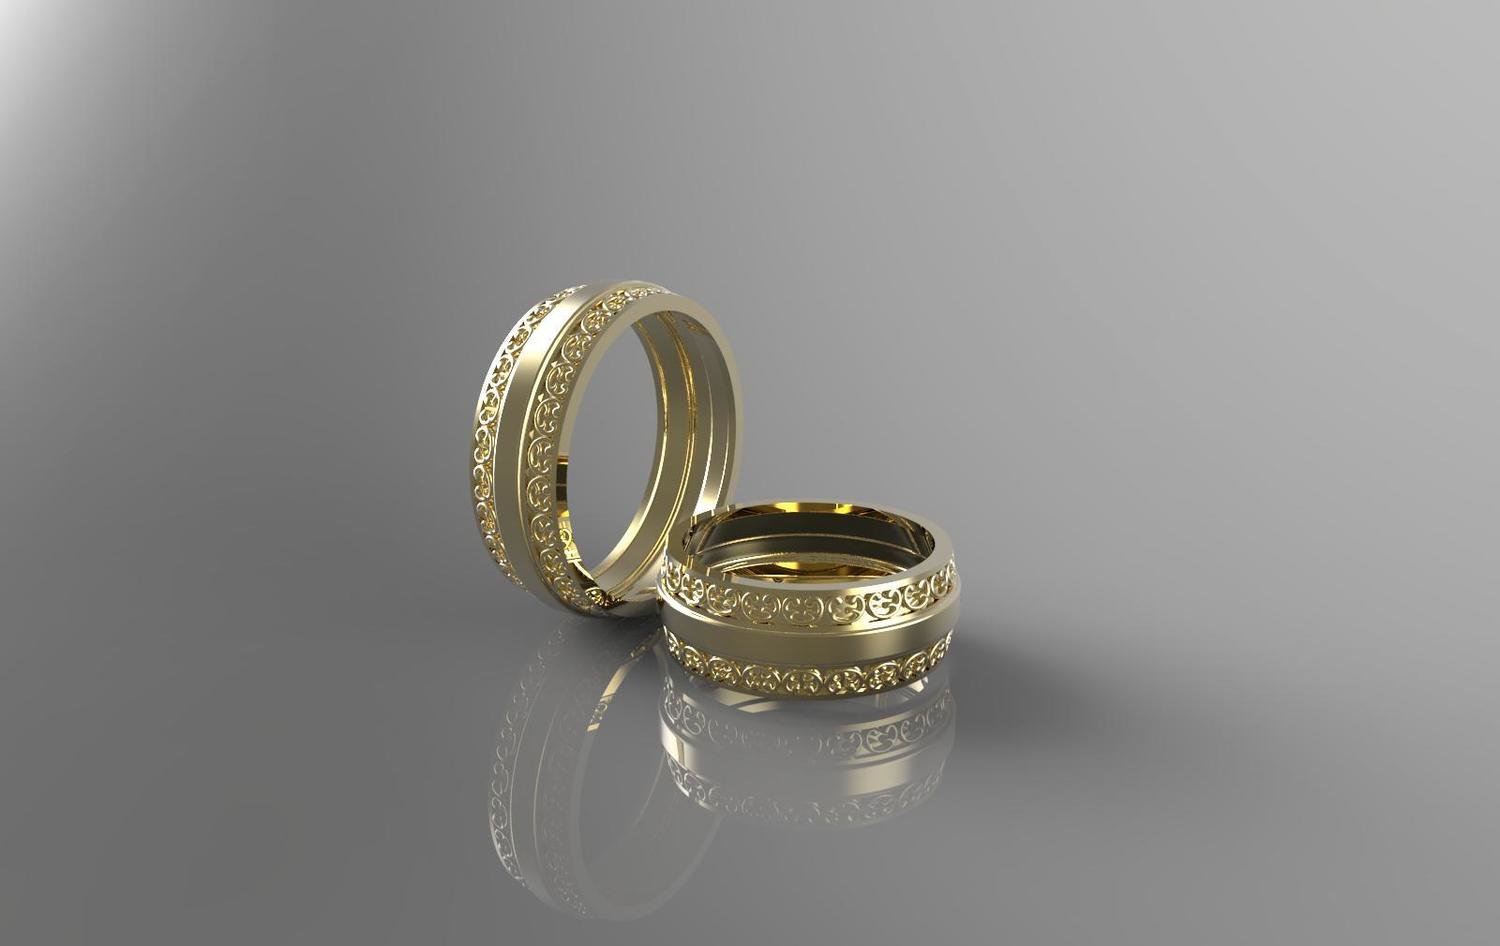 3D CAD Model of Wedding Ring (Size 13.5)